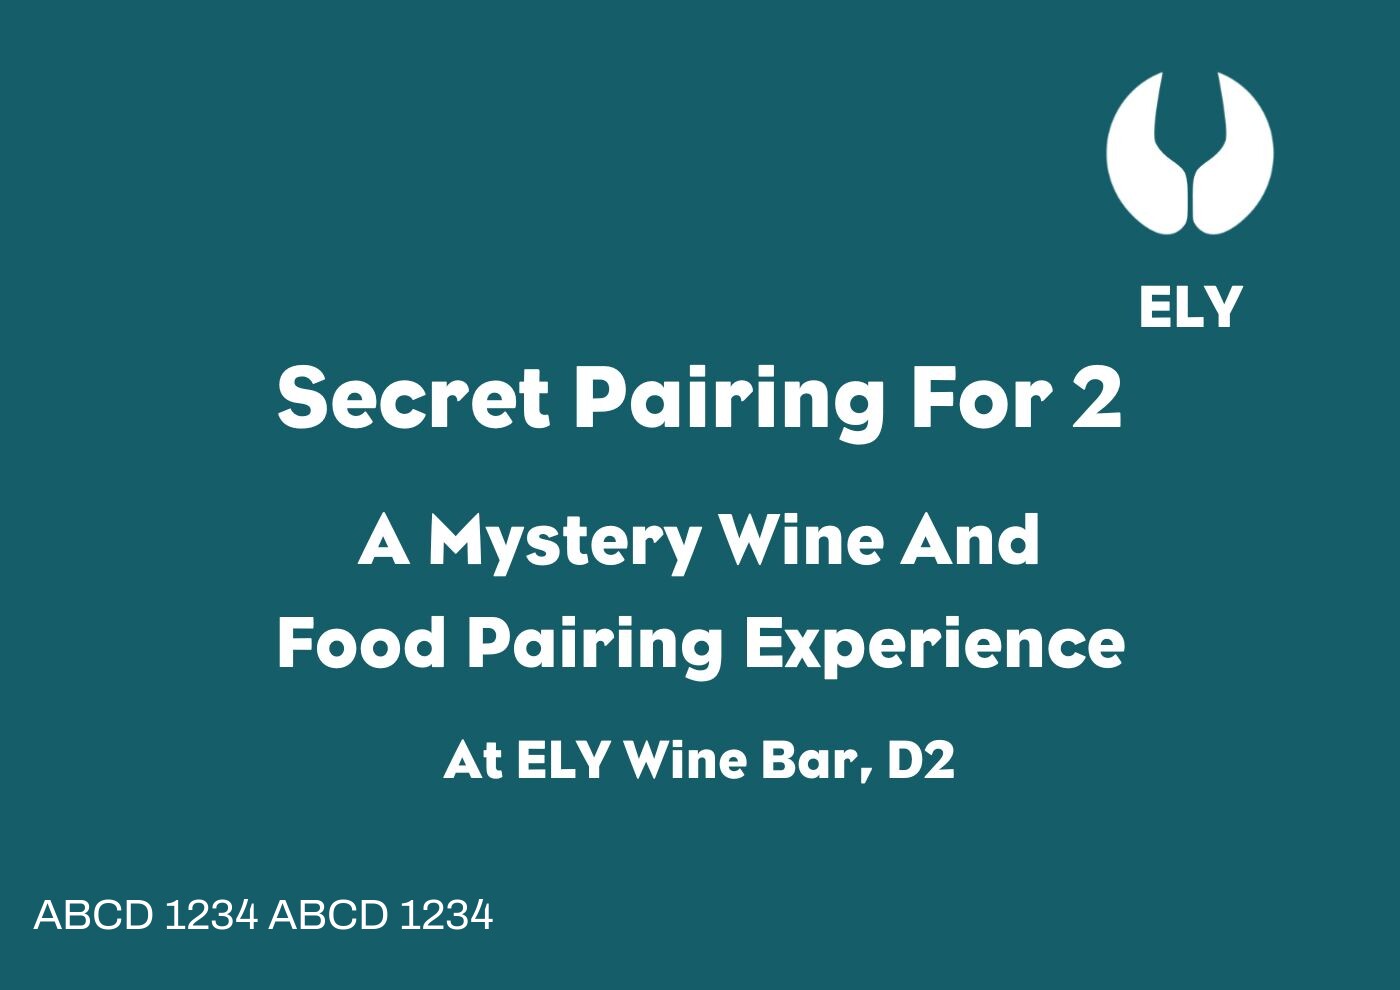 'Secret Pairing For 2' A Mystery Wine And Food Pairing Experience At ELY Wine Bar, D2